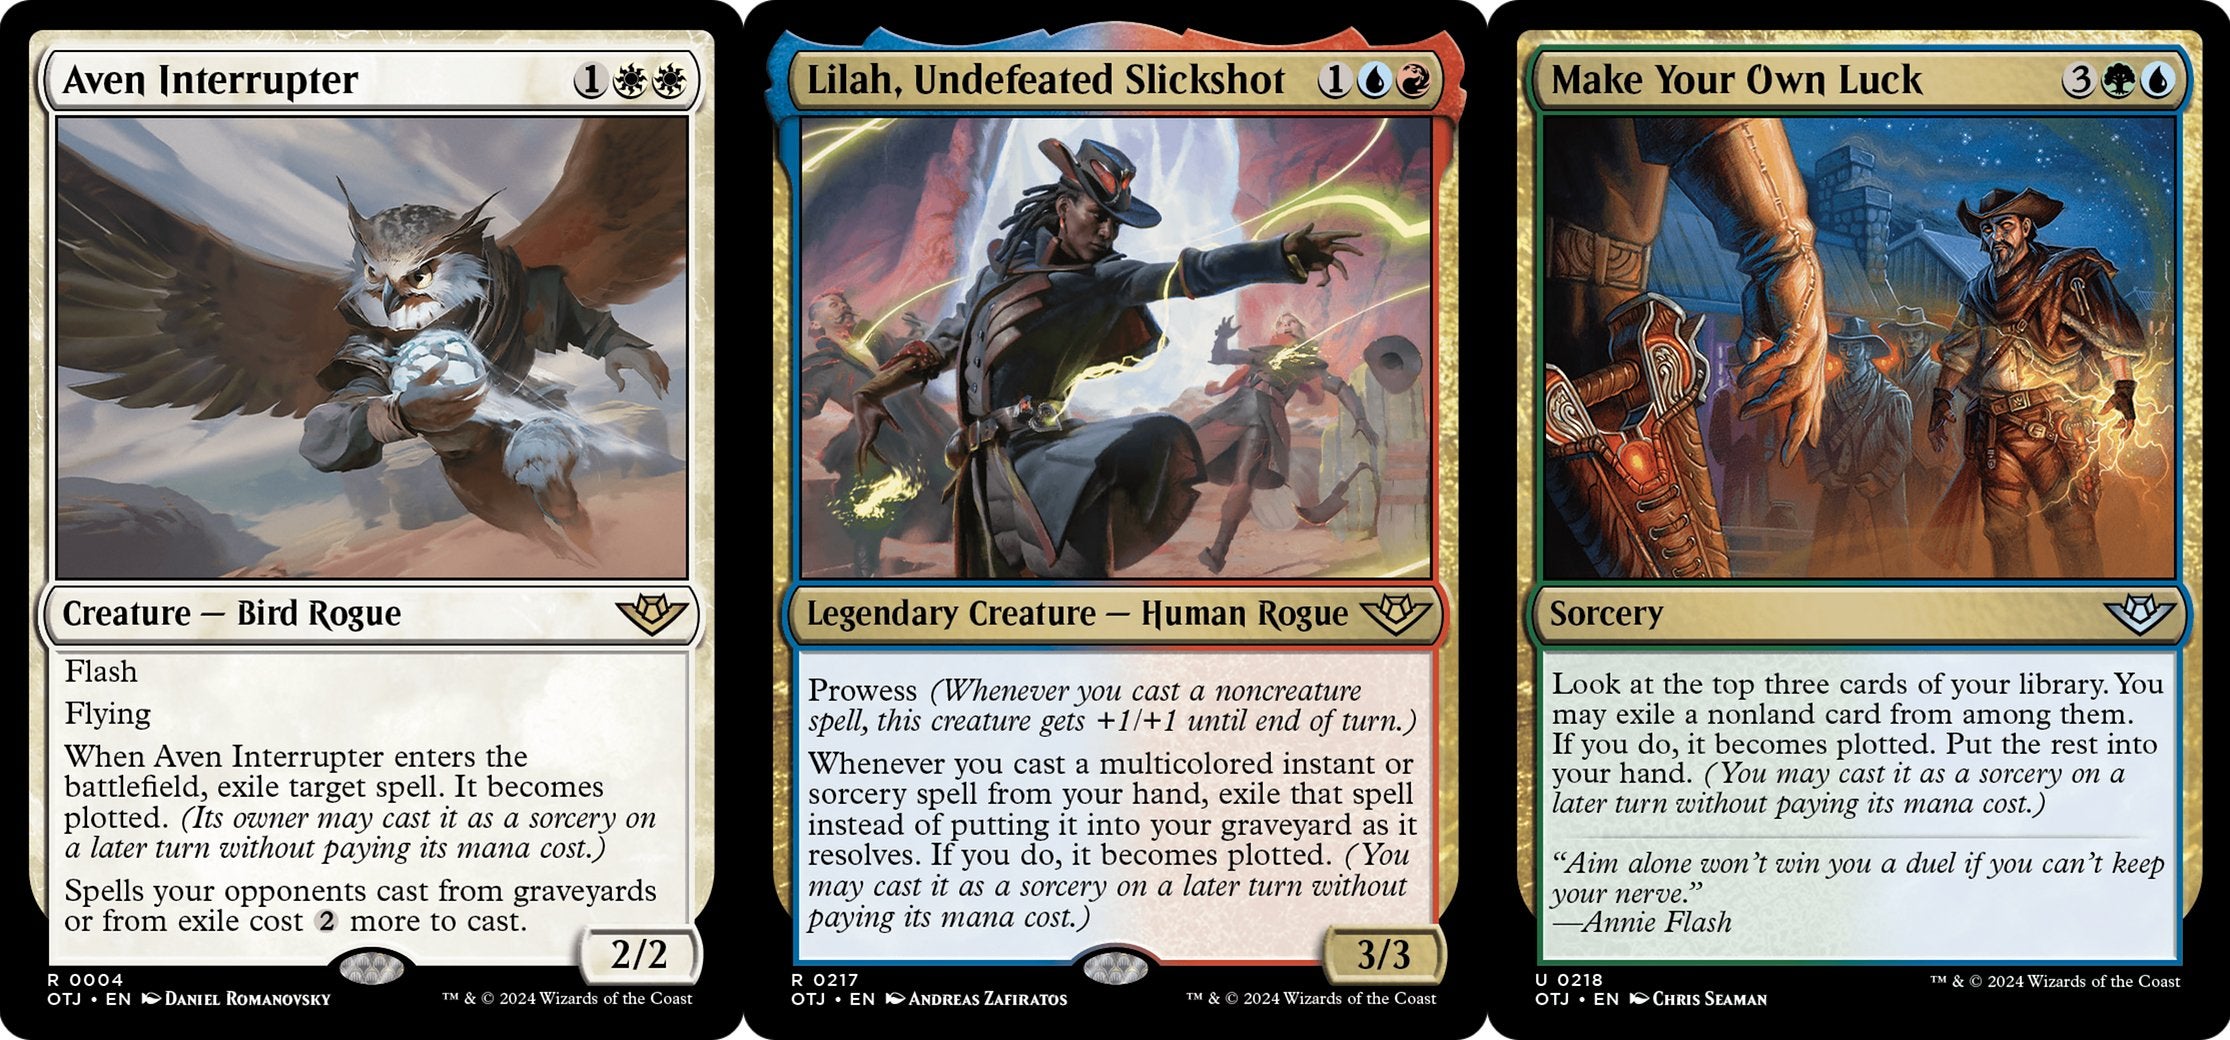 The Aven Interrupter; Lilah, Undefeated Slickshot, and Make Your Own Luck cards from MTG.